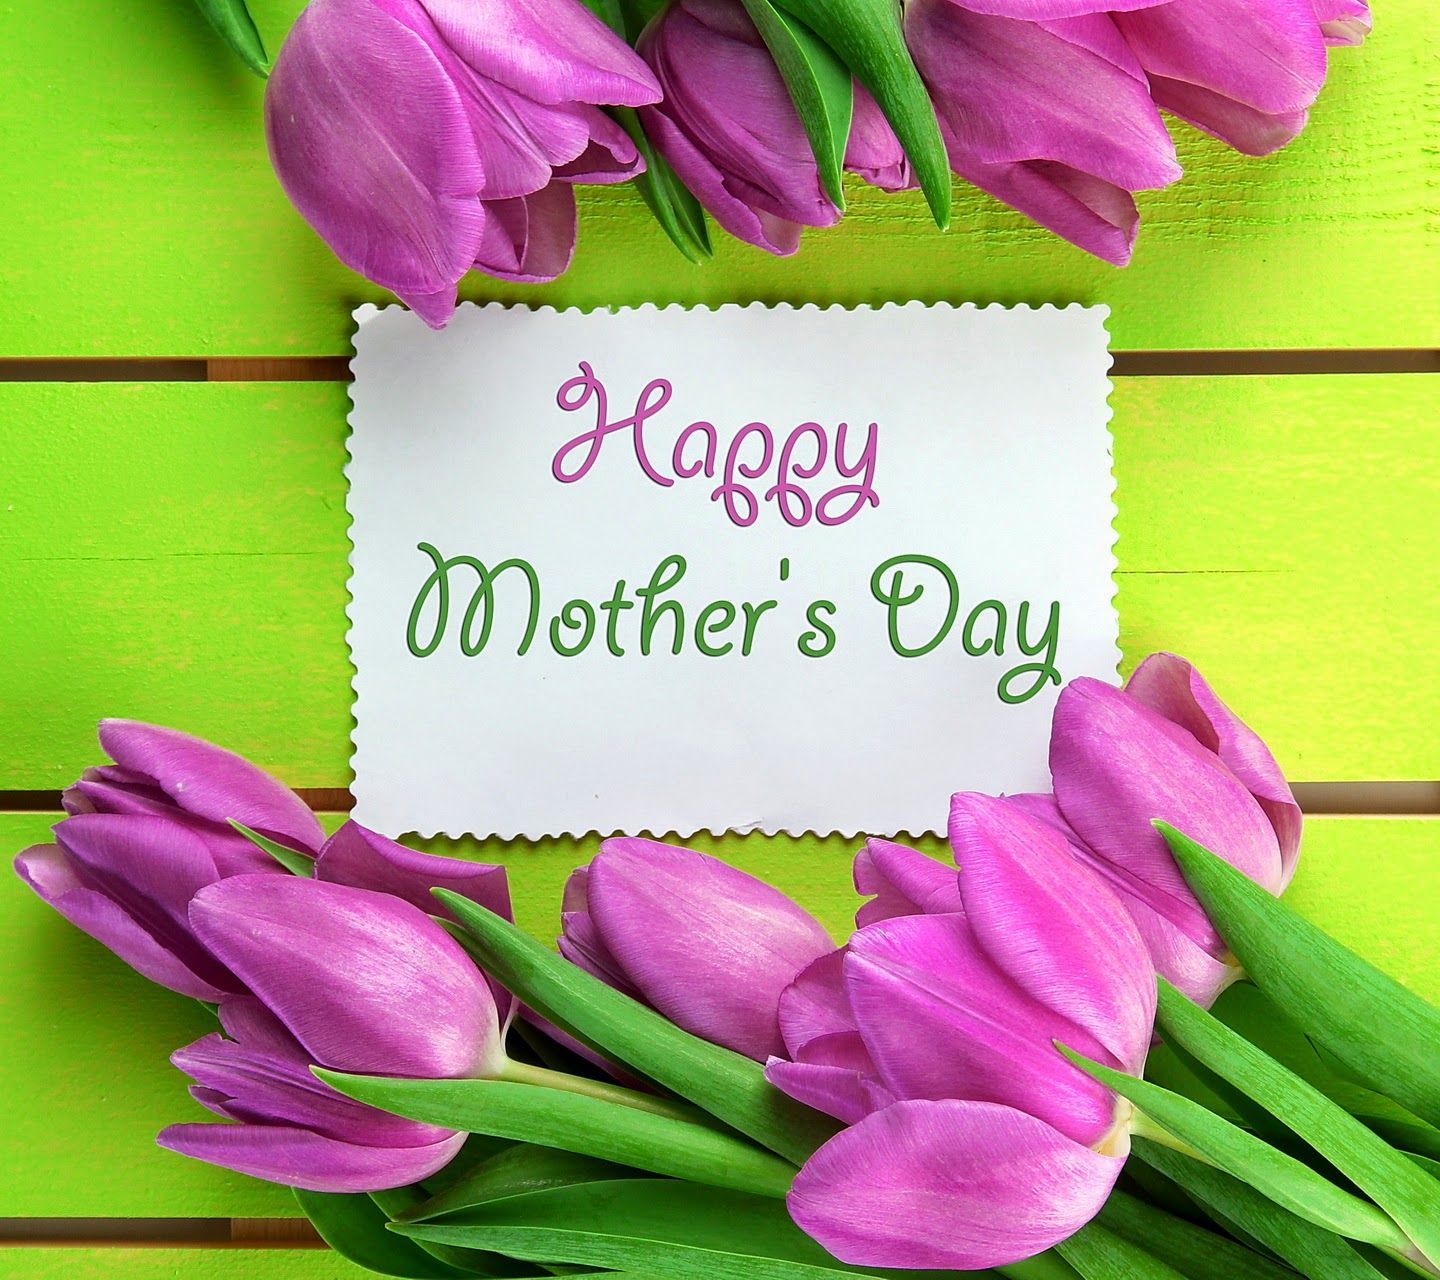 Mothers Day Wallpaper HD